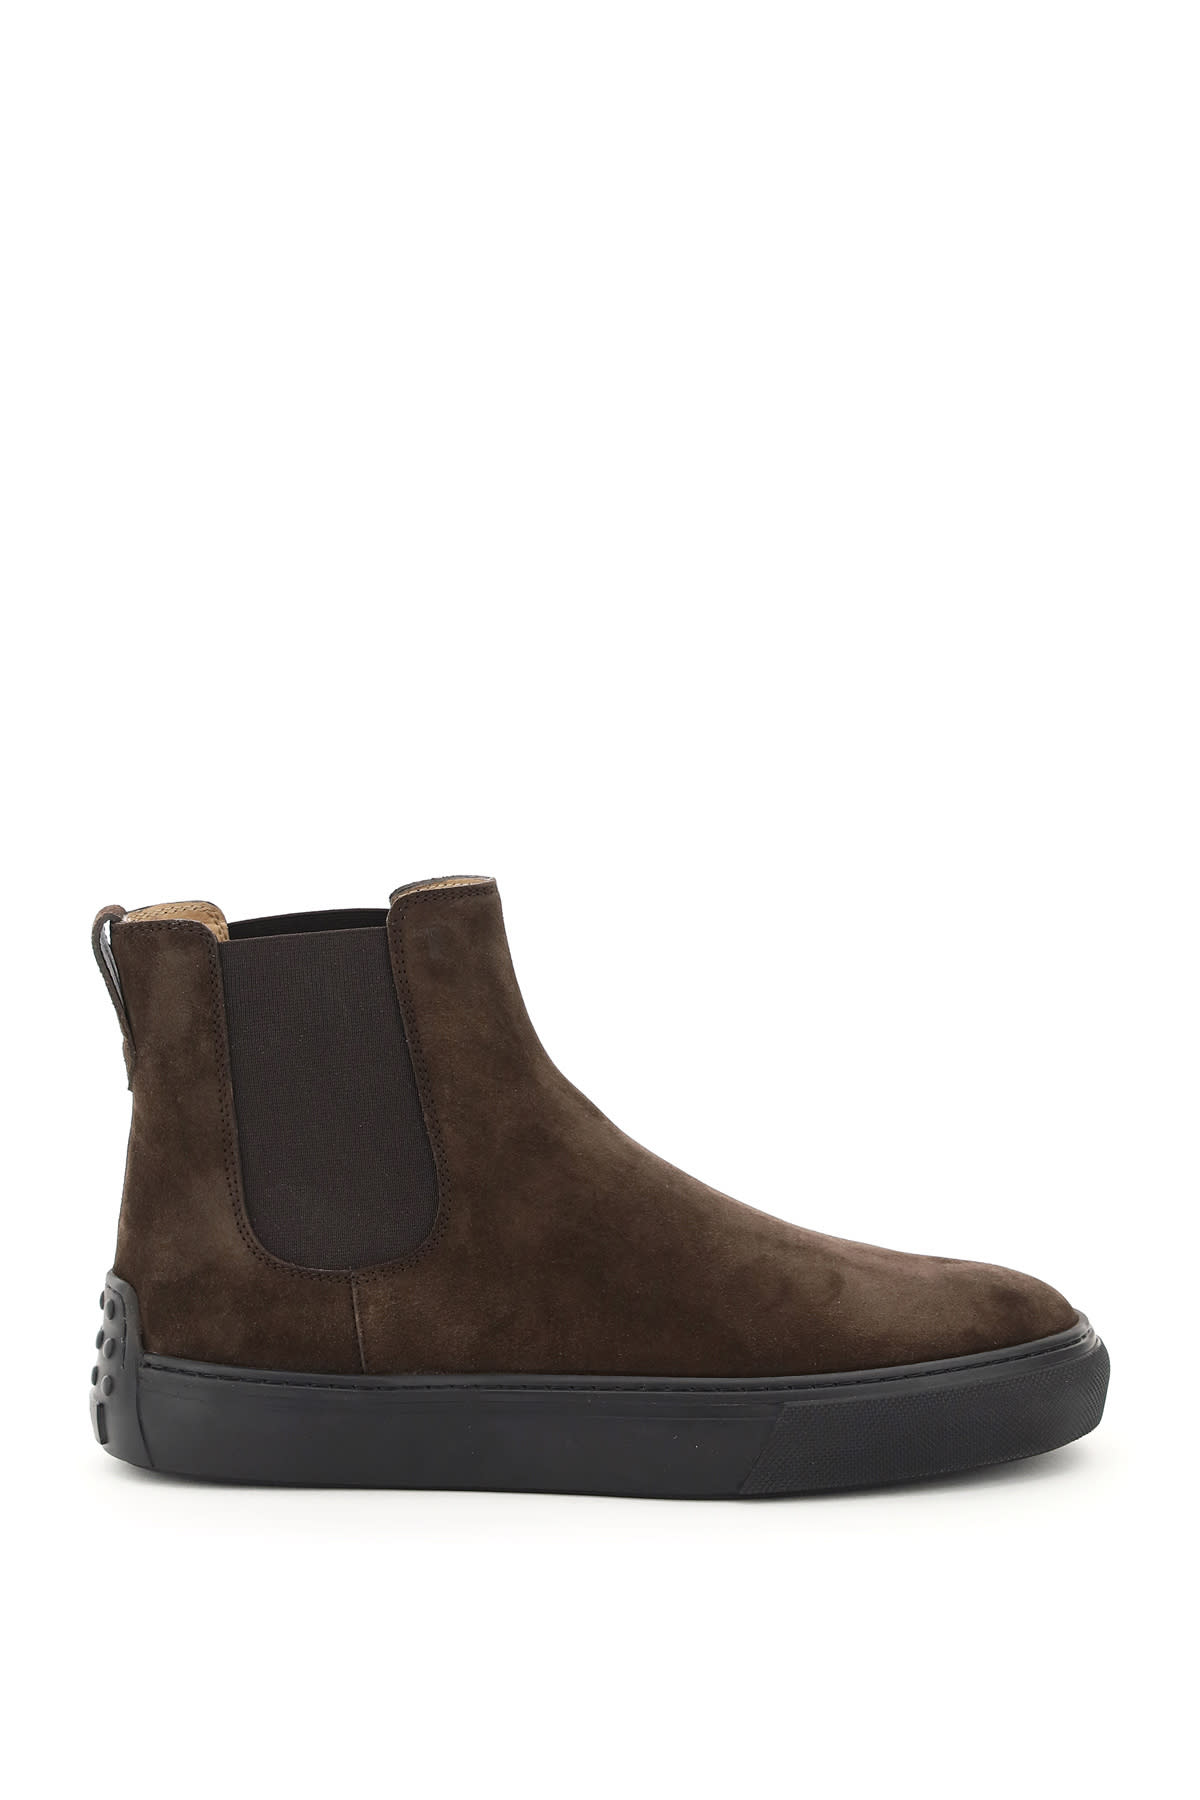 Tods Elastic Sided Ankle Boots